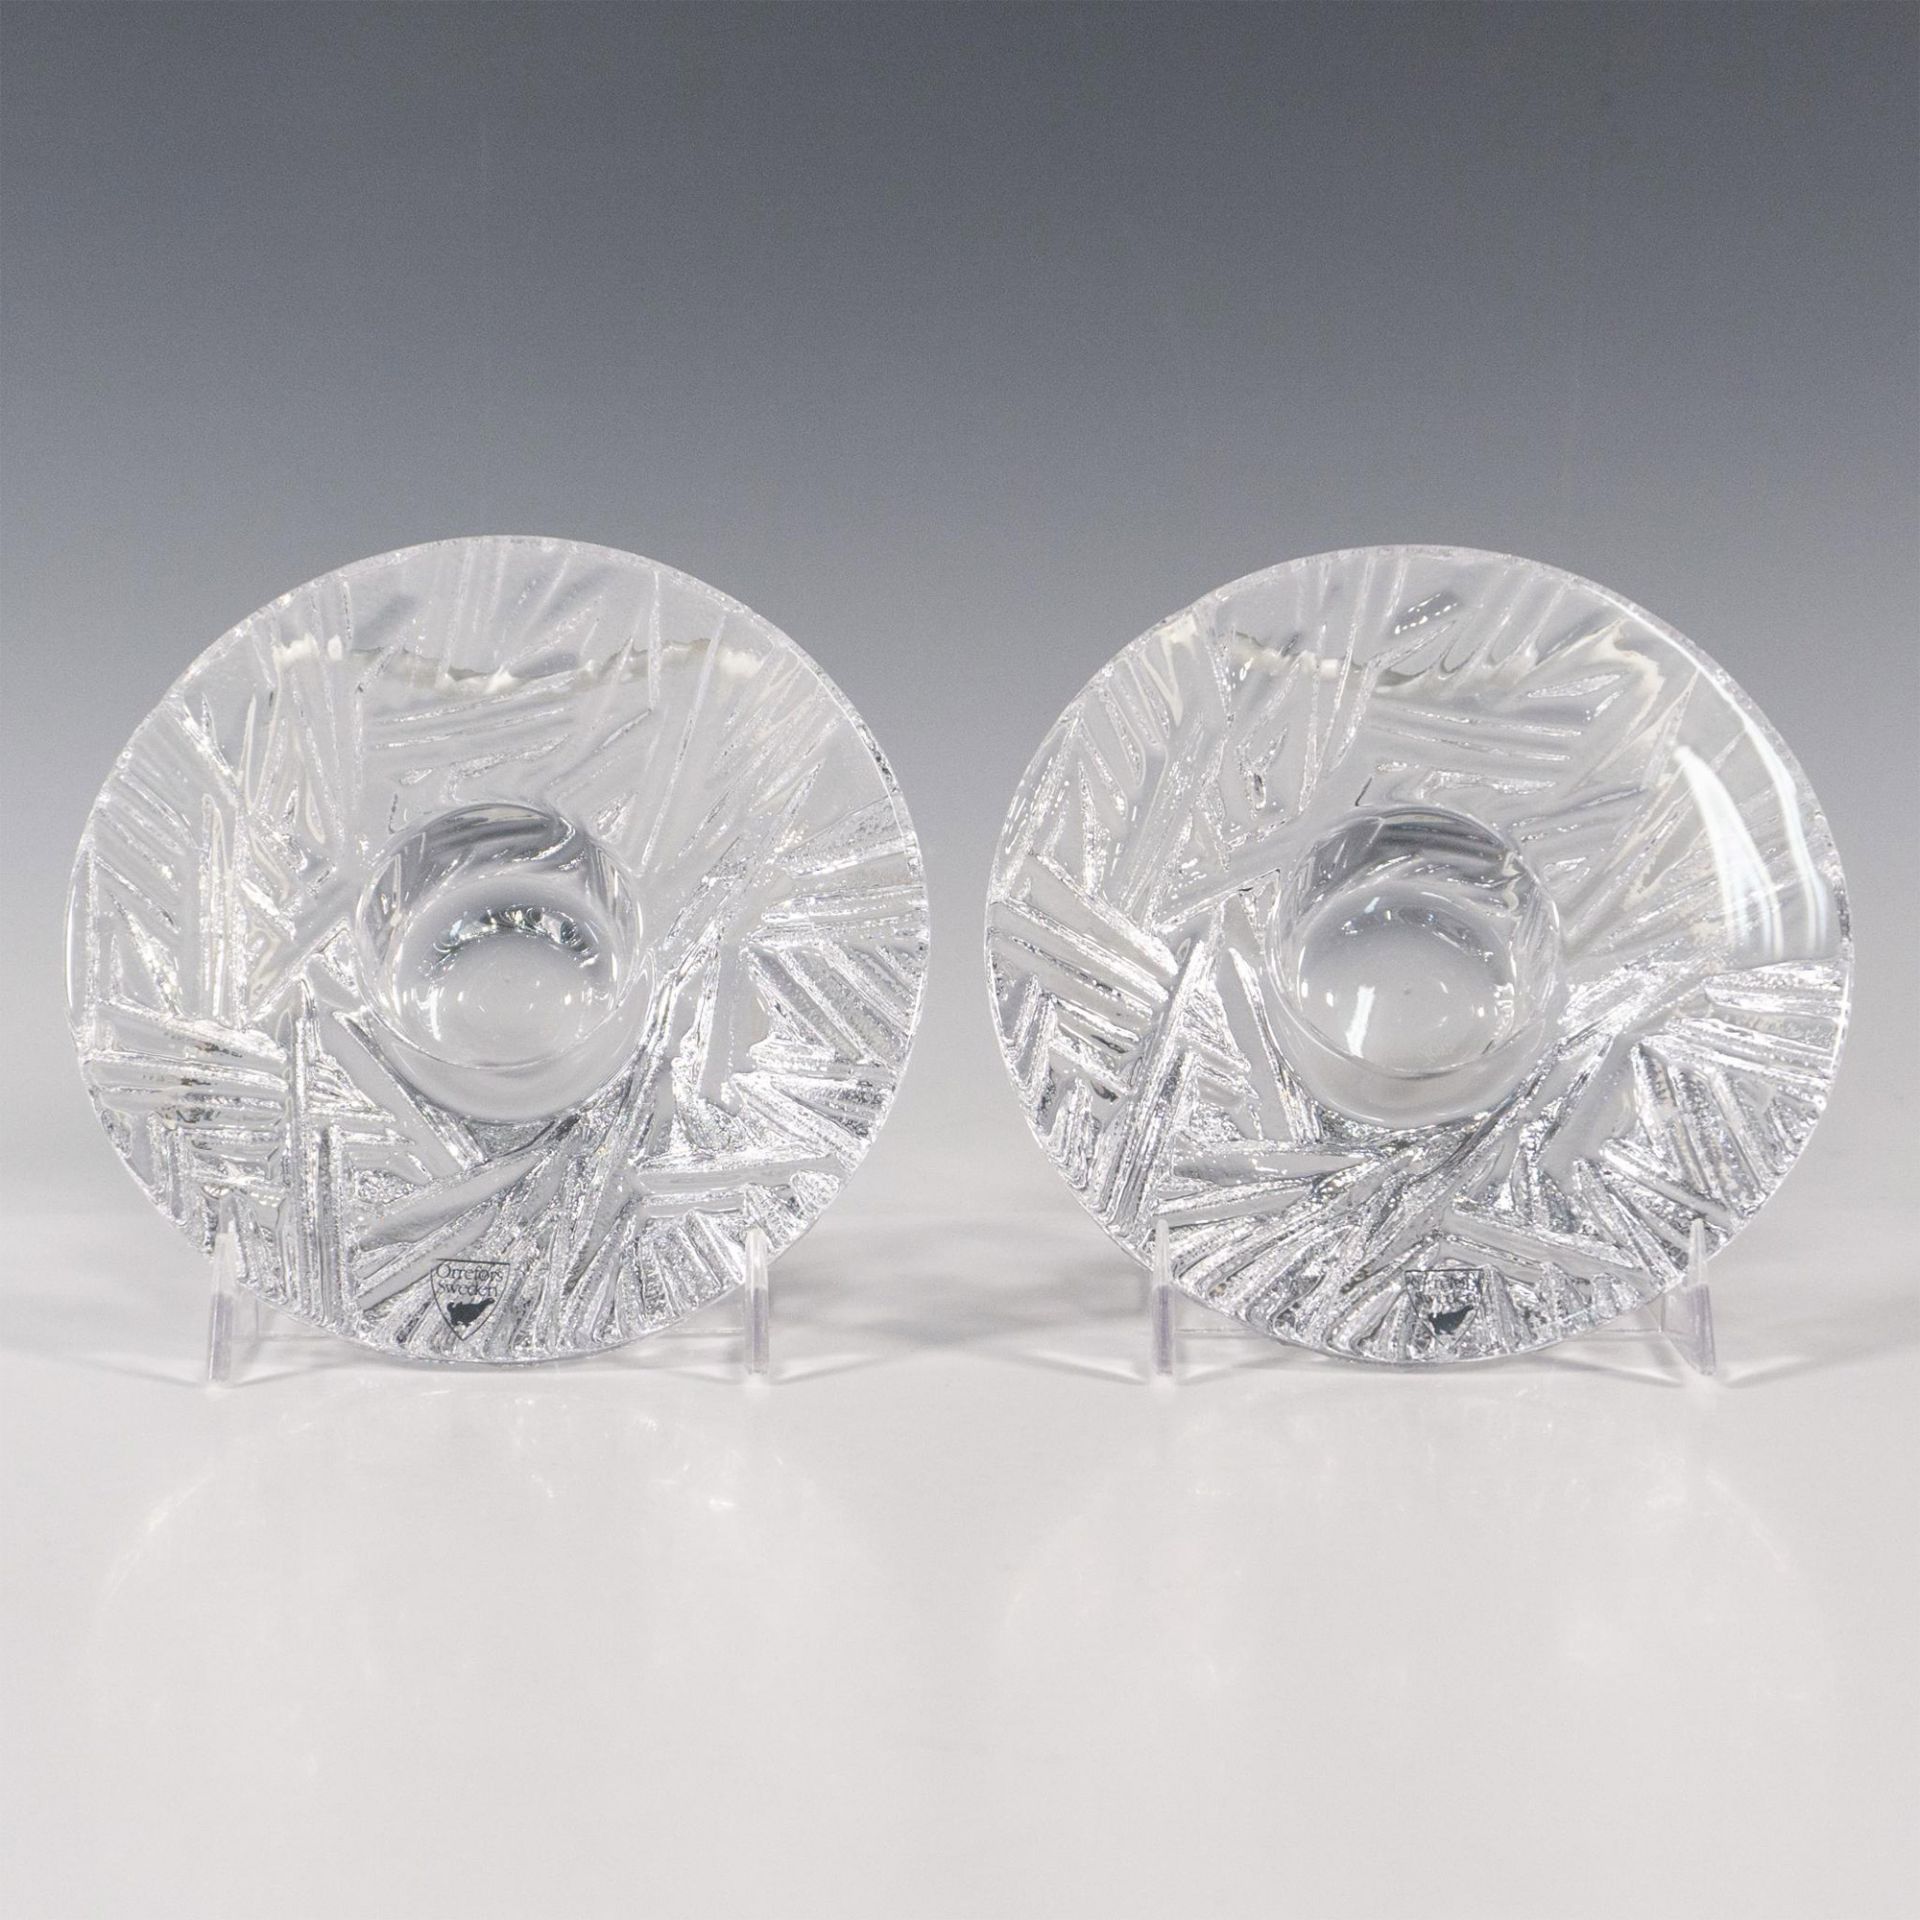 Pair of Orrefors Crystal Candle Holders, Icy Votive